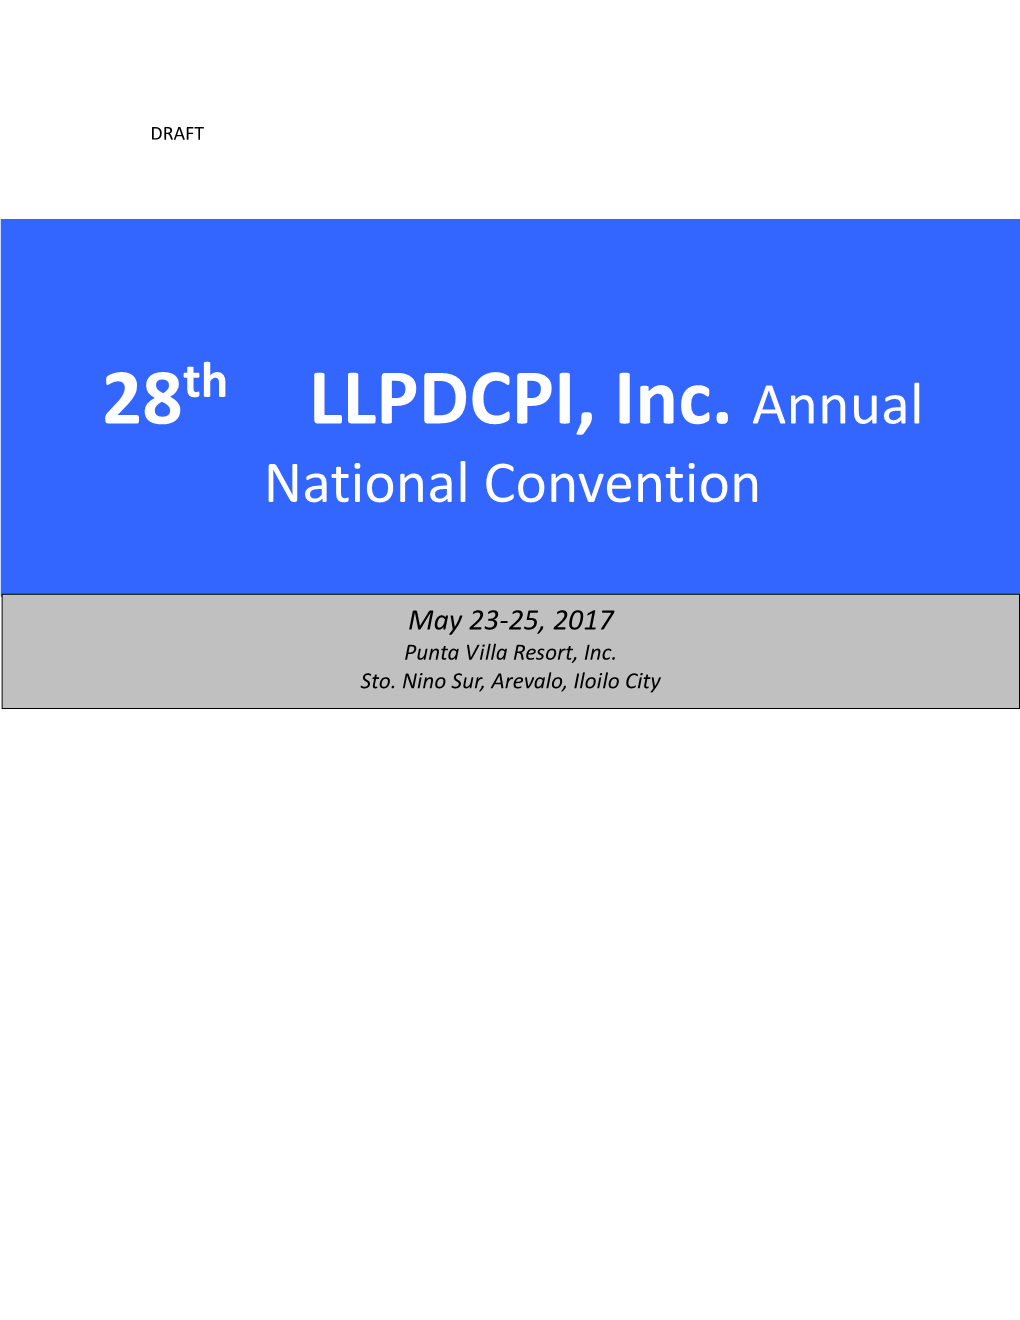 28Th Annual National Convention of League of Local Planners and Development Coordinators of the Philippines, Inc